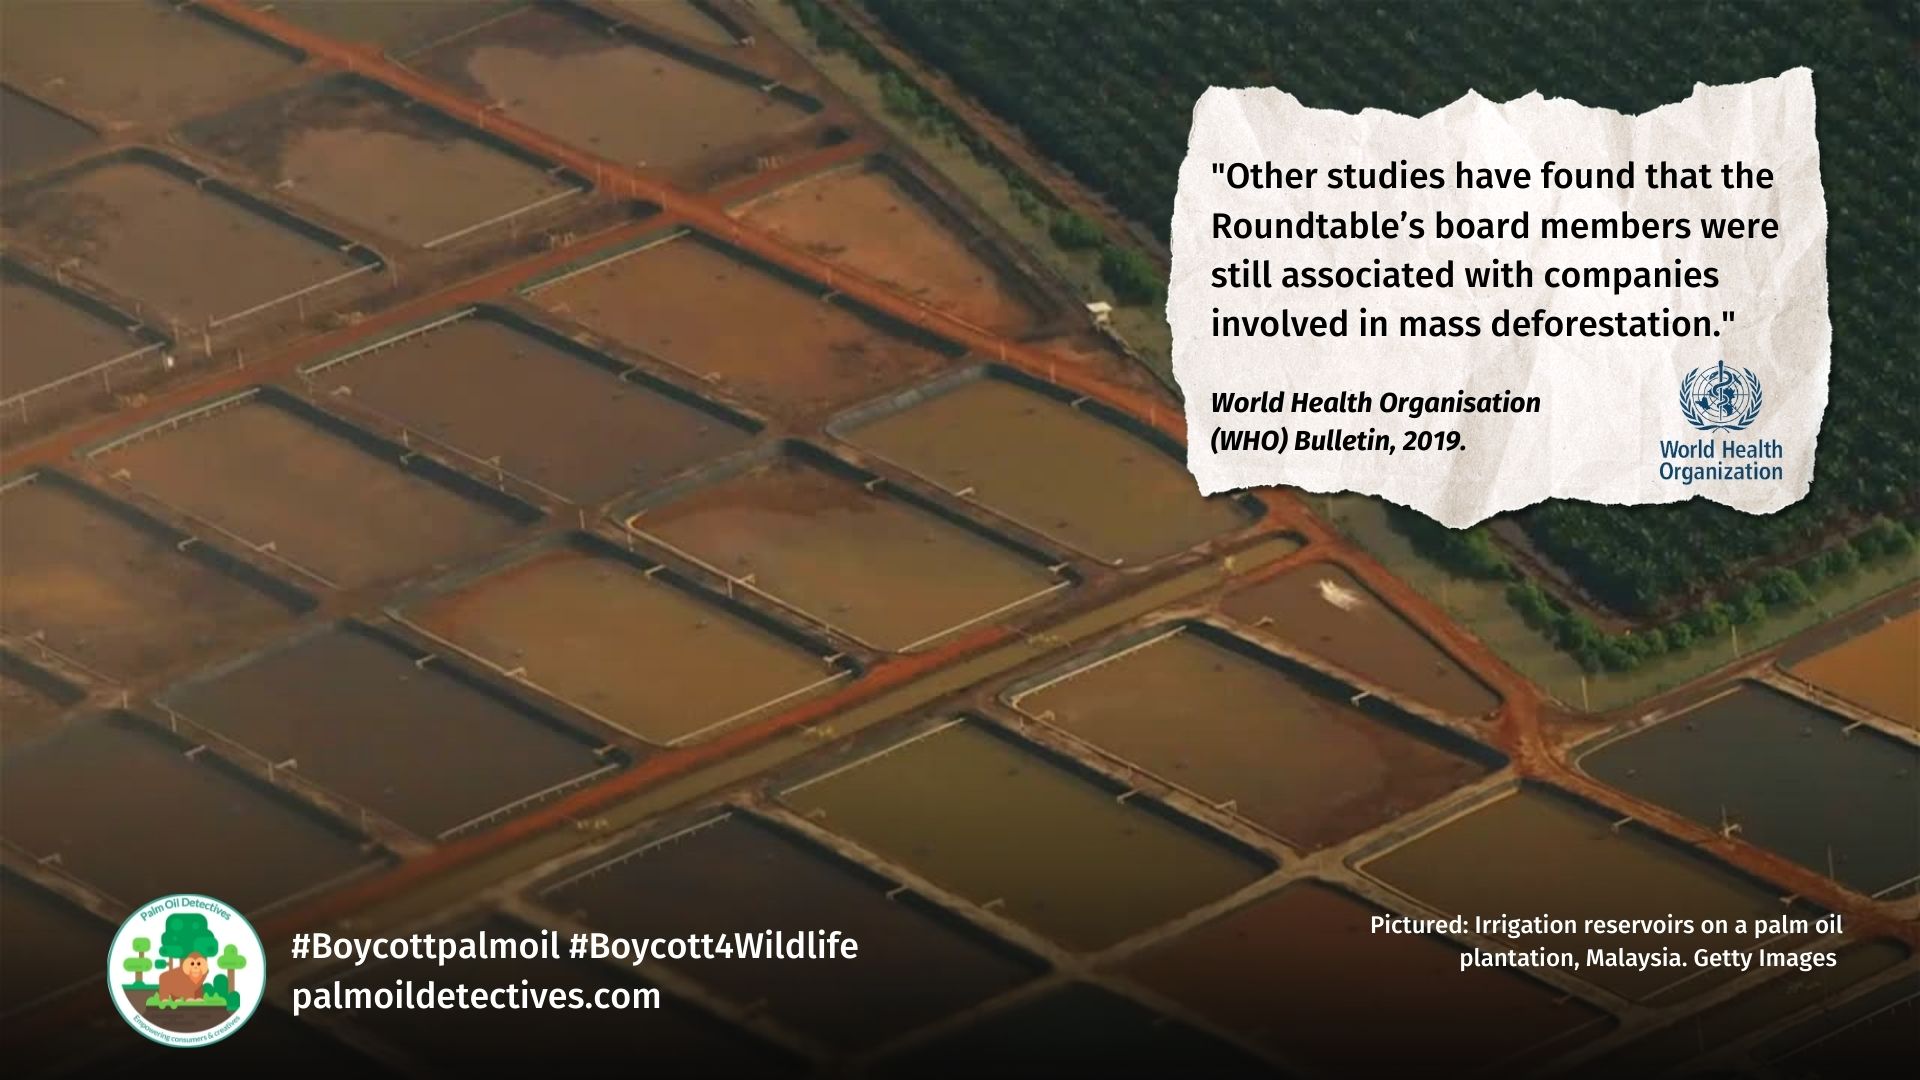 WHO Bulletin on Palm Oil: Deforestation and Extinction